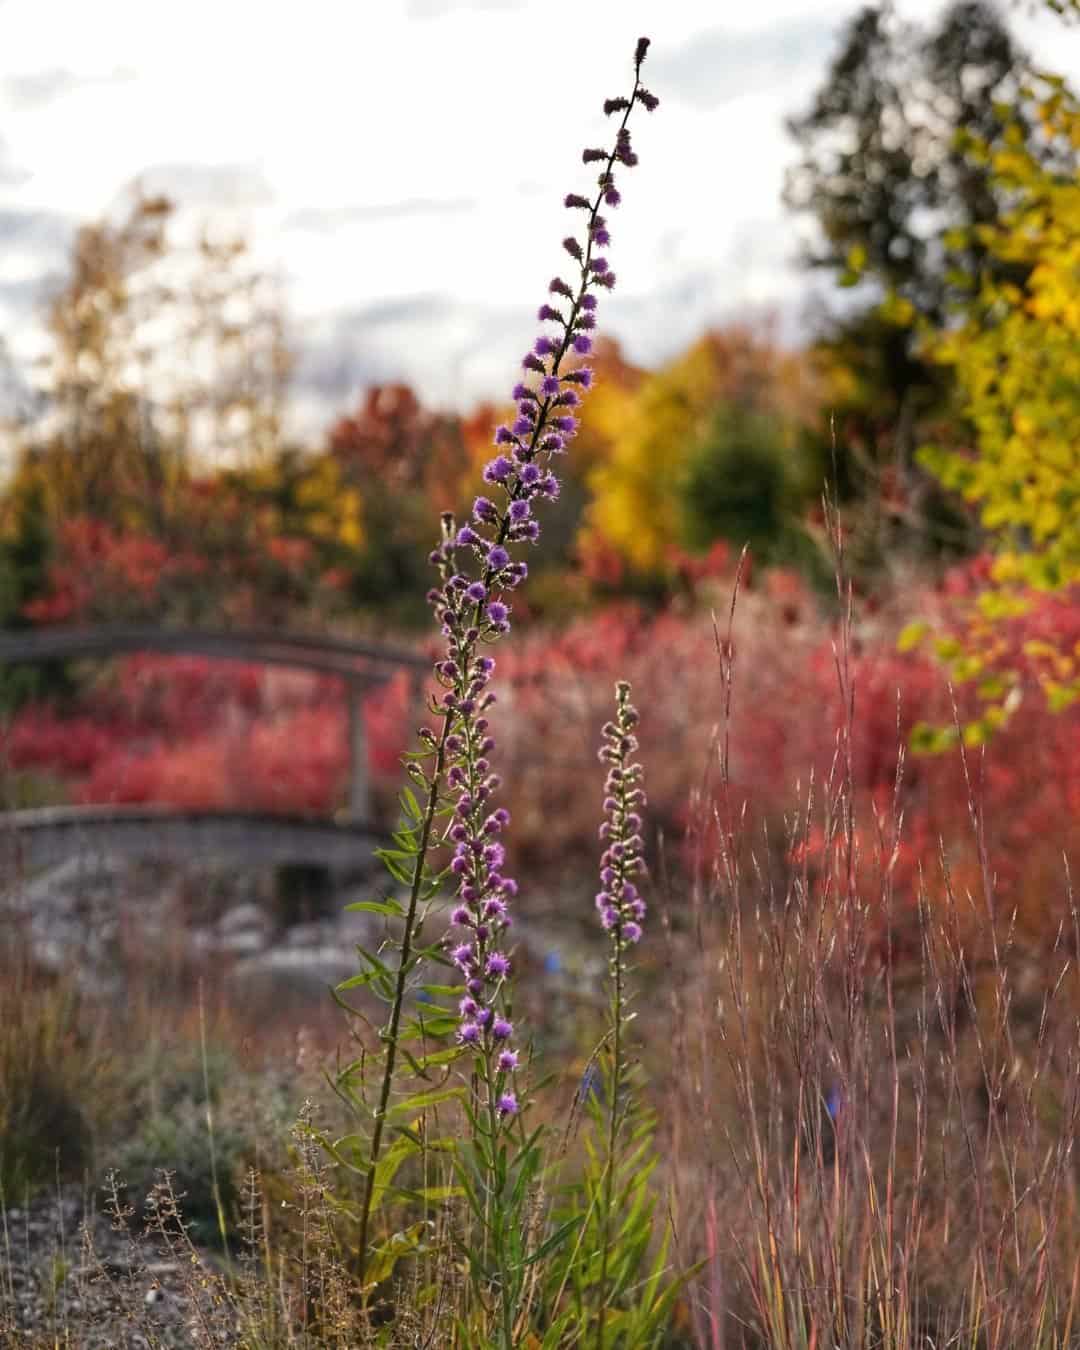 A tall Prairie Gay Feather stands in focus amidst an autumn landscape, with red and yellow foliage in the background. A wooden bridge crosses a stream in the distance under an overcast sky, capturing the serene beauty of Wisconsin's fall season.